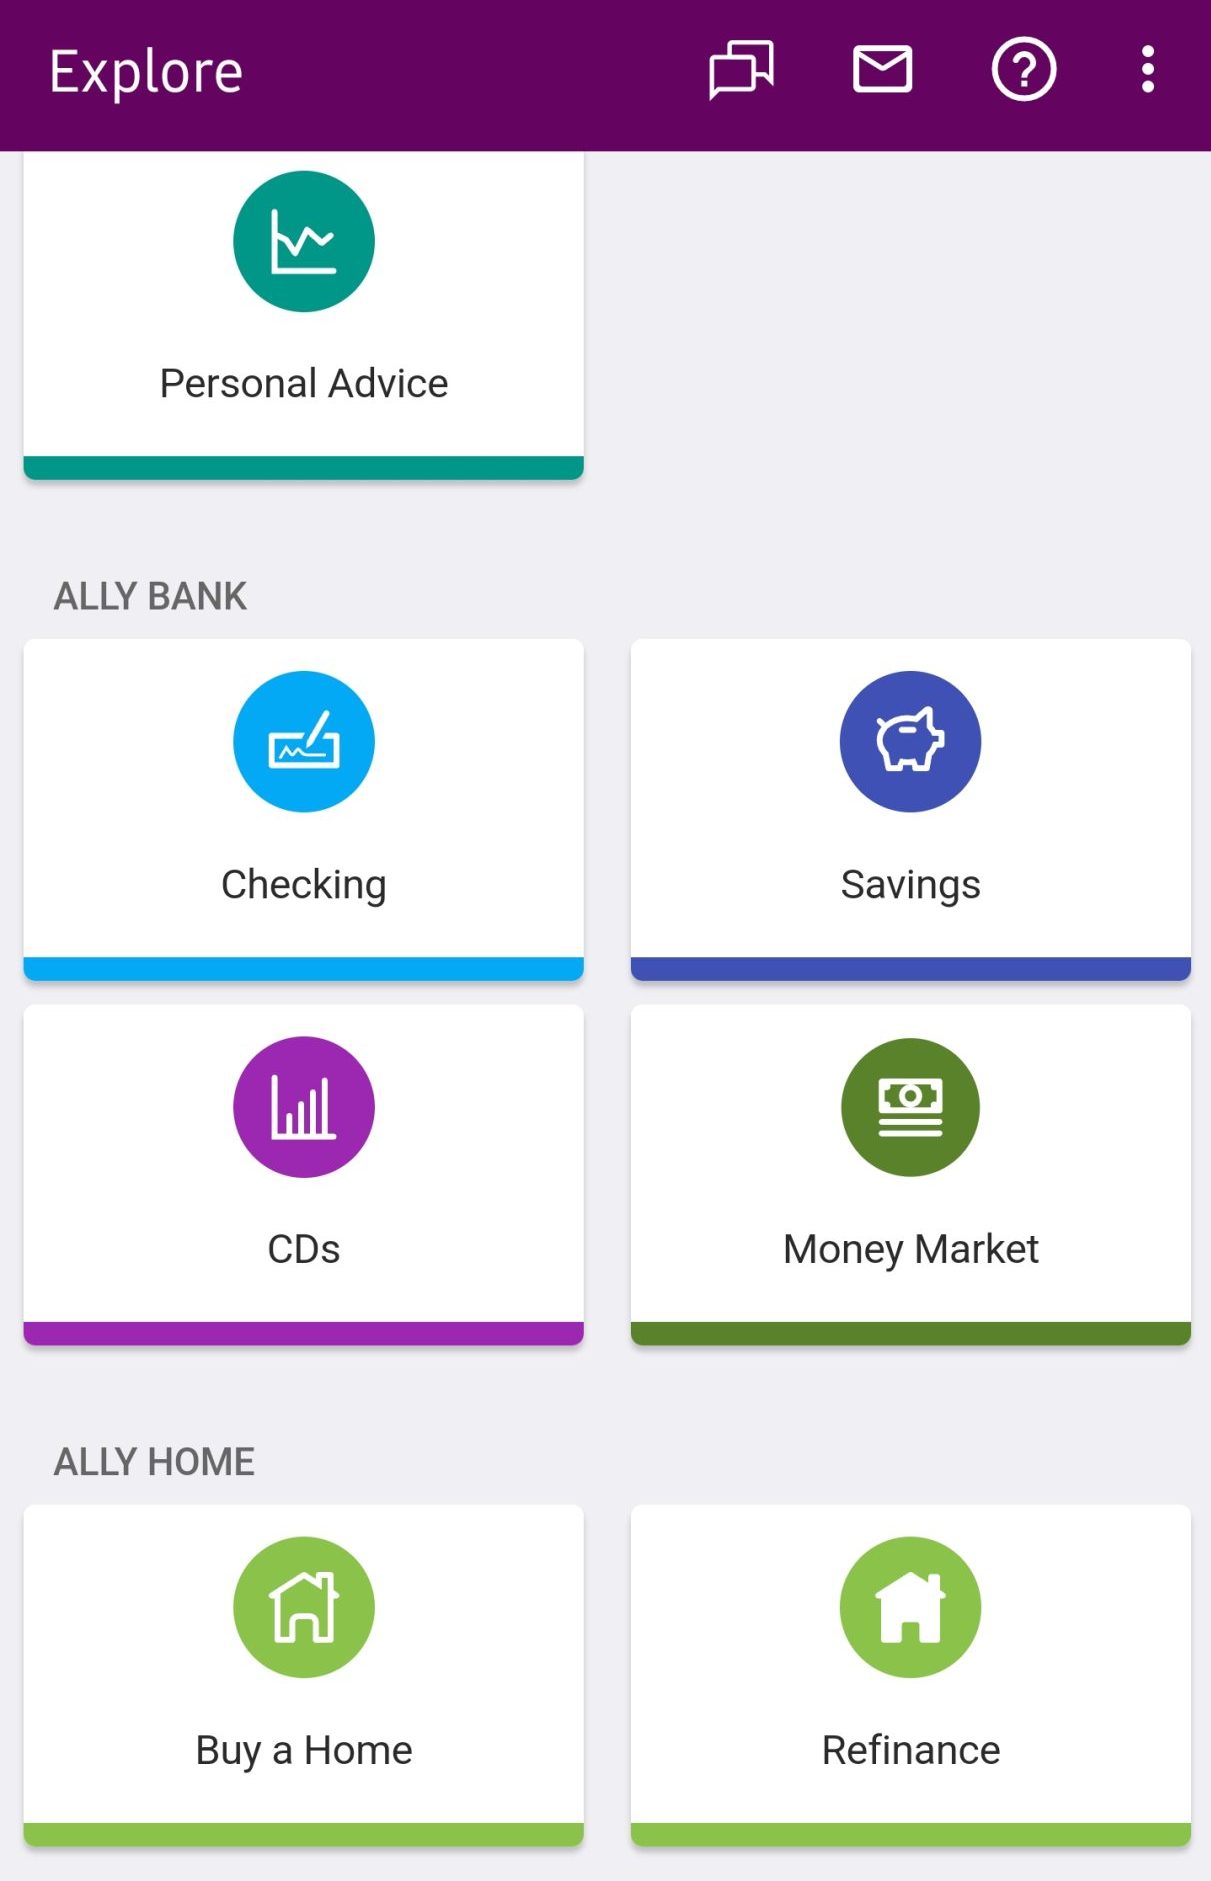 Explore Ally Bank banking options